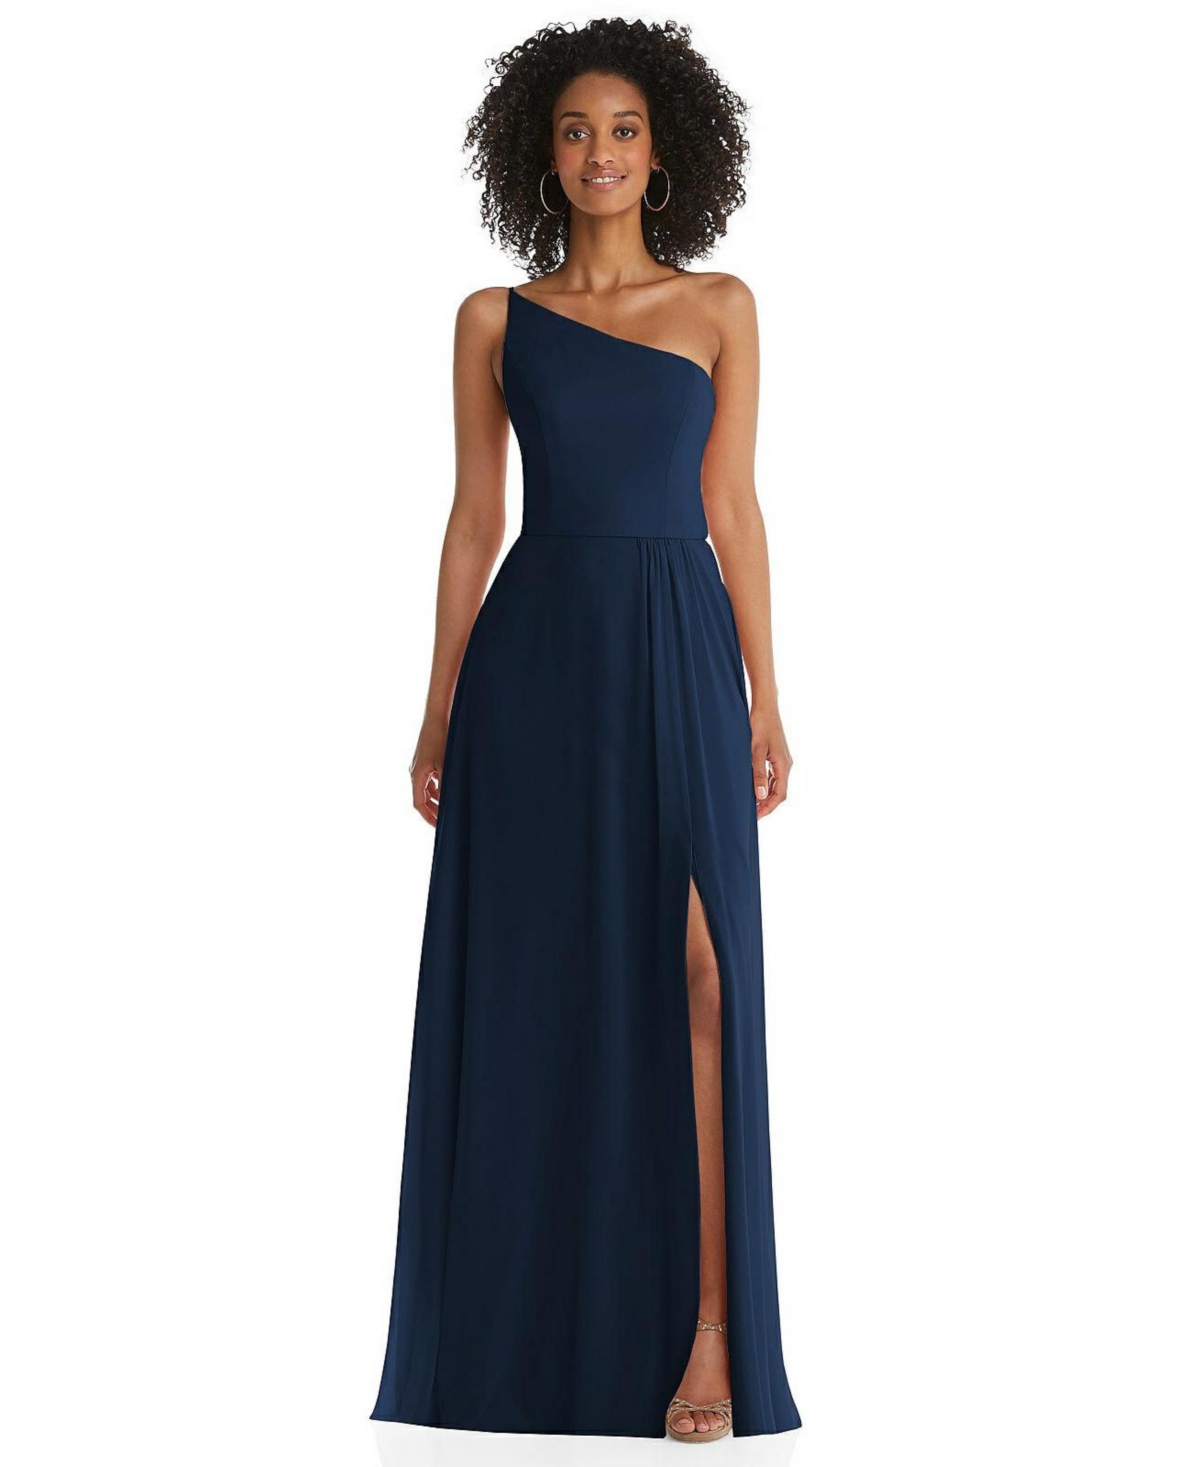 Women's One-Shoulder Chiffon Maxi Dress with Shirred Front Slit - Midnight navy